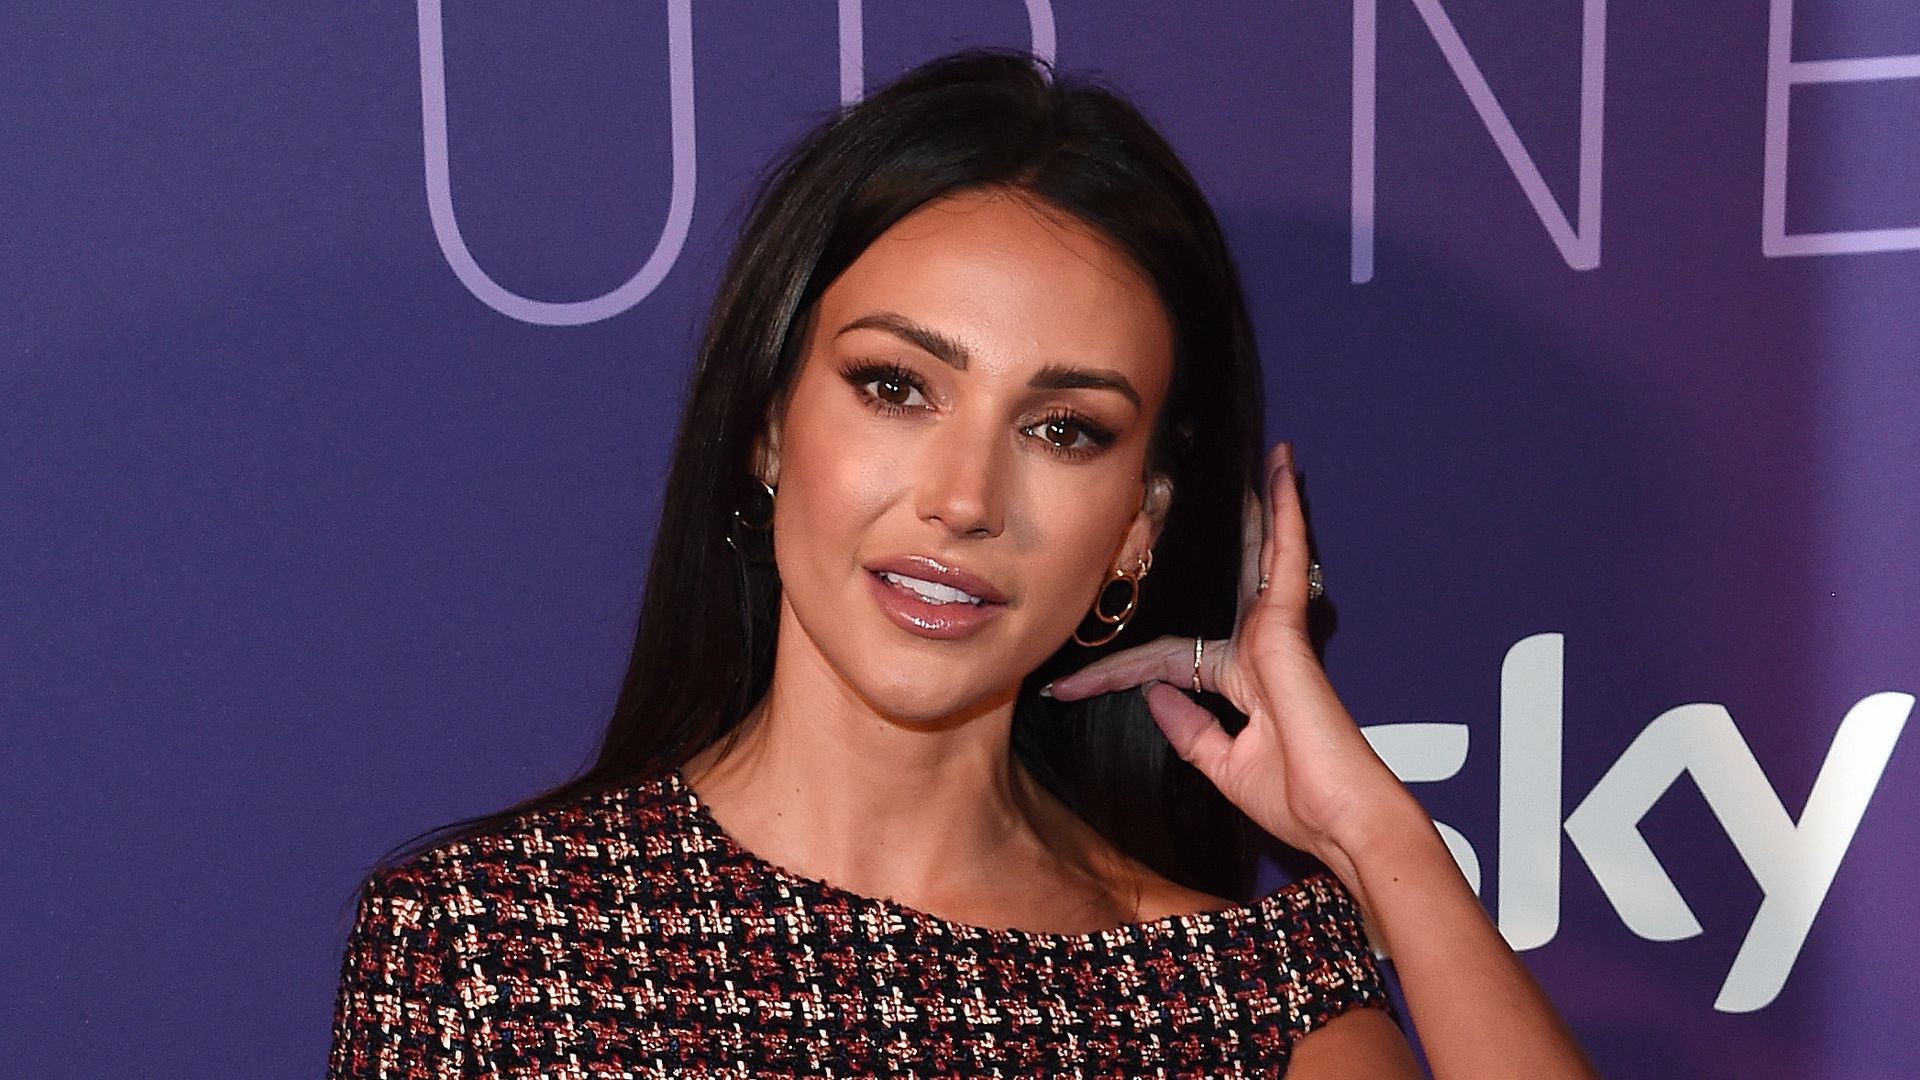 Michelle Keegan attends the Sky Up Next 2020 at Tate Modern